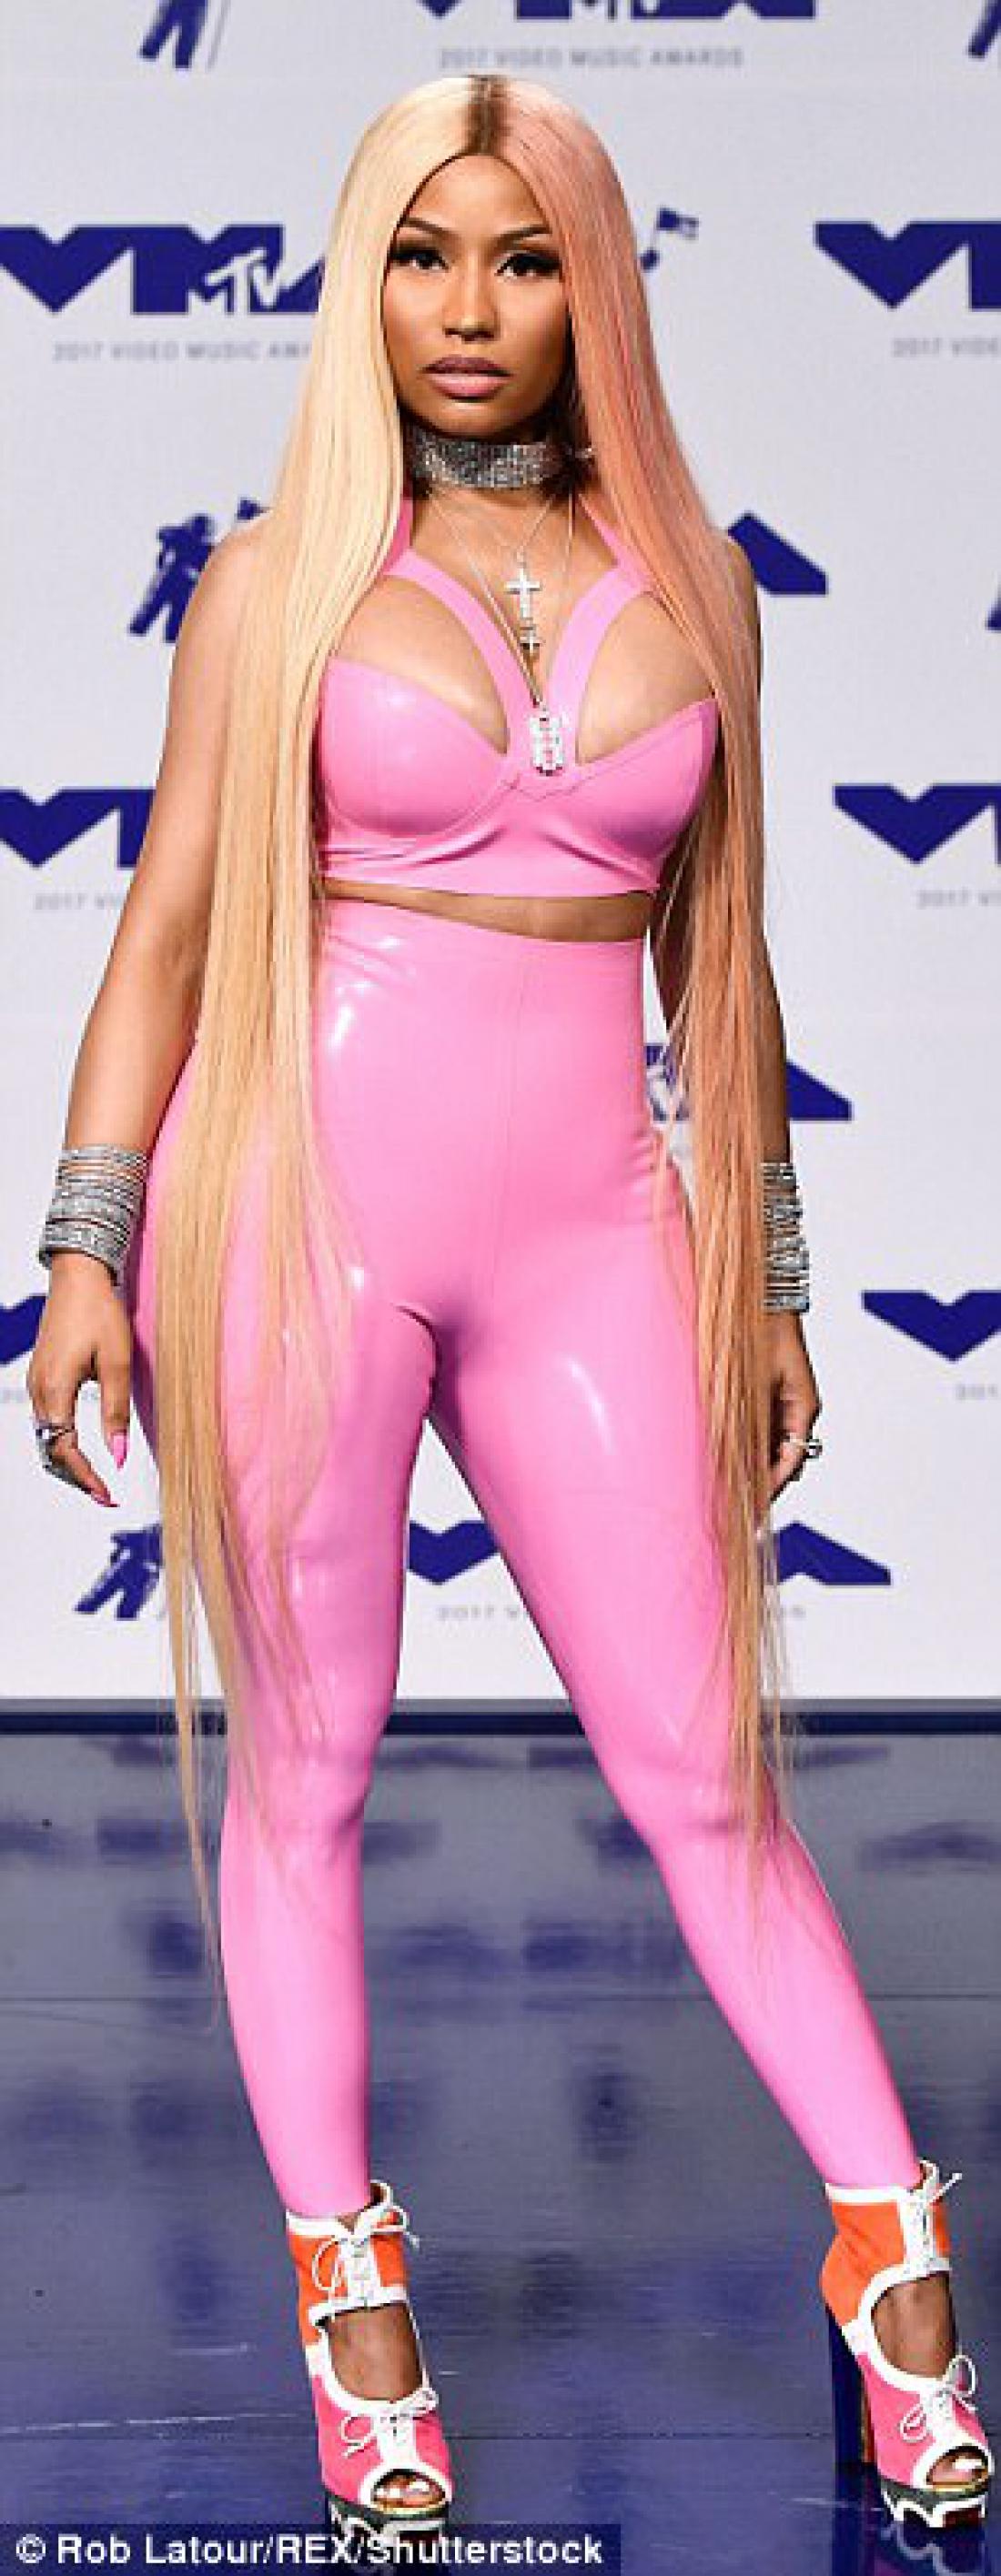 439FDC4000000578-4828382-Pretty_in_pink_Nicki_Minaj_absolutely_scintillated_in_a_pink_lat-a-5_1503906917574.jpg